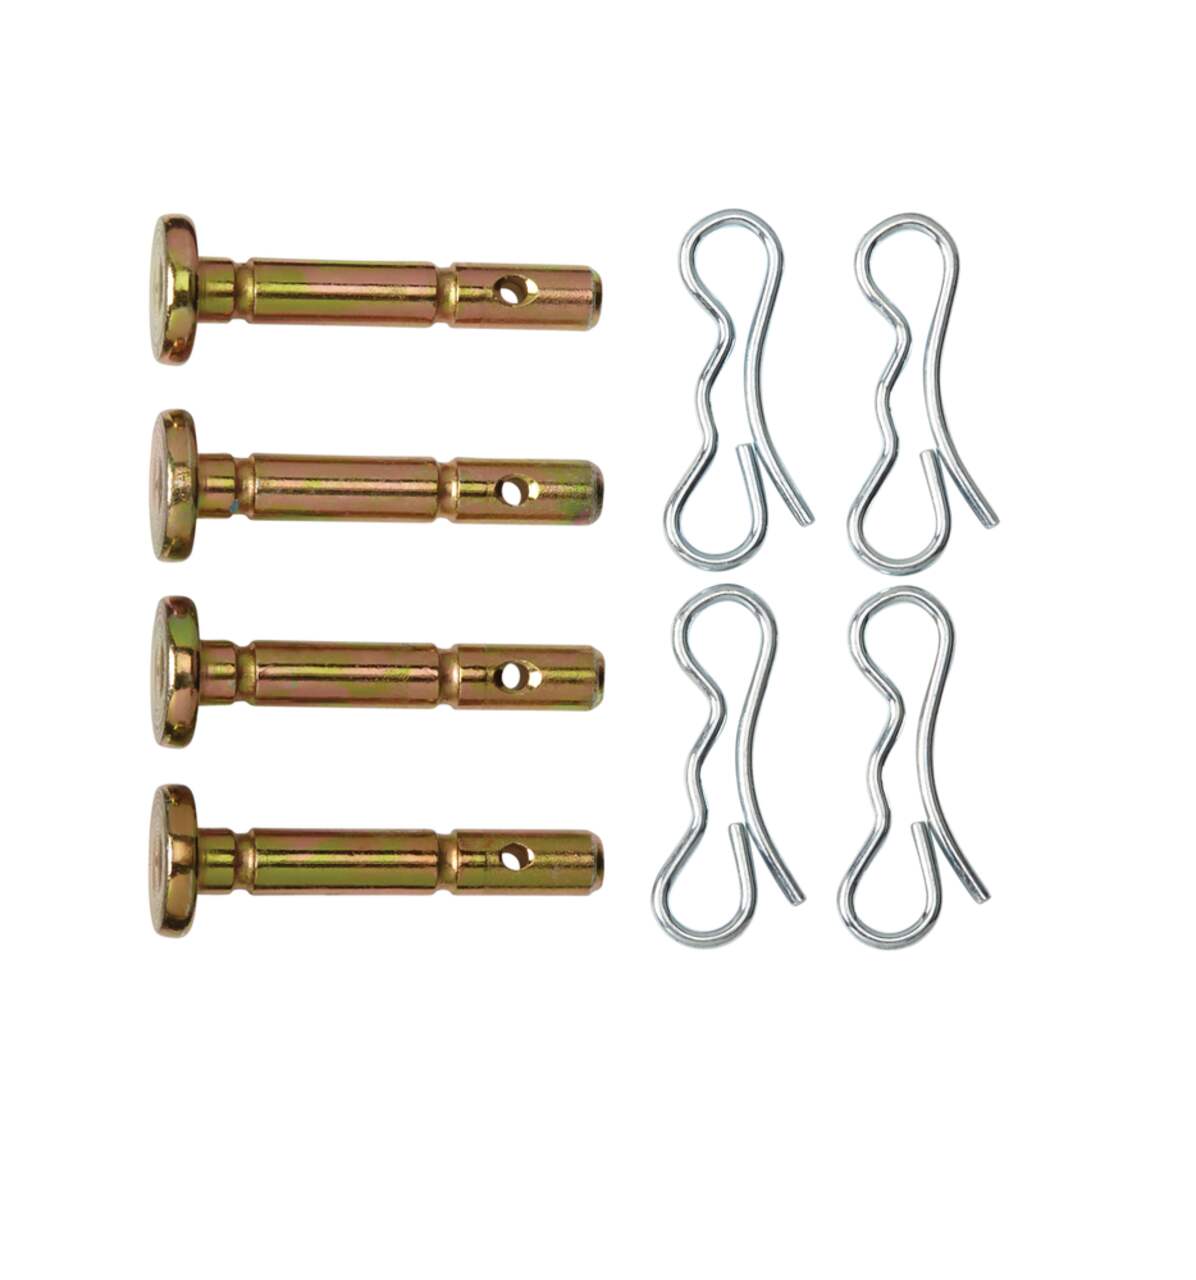 Certified Replacement Shear Pins, Incl. Cotter Pins, 1/4 x 1.5-in, 4-pk